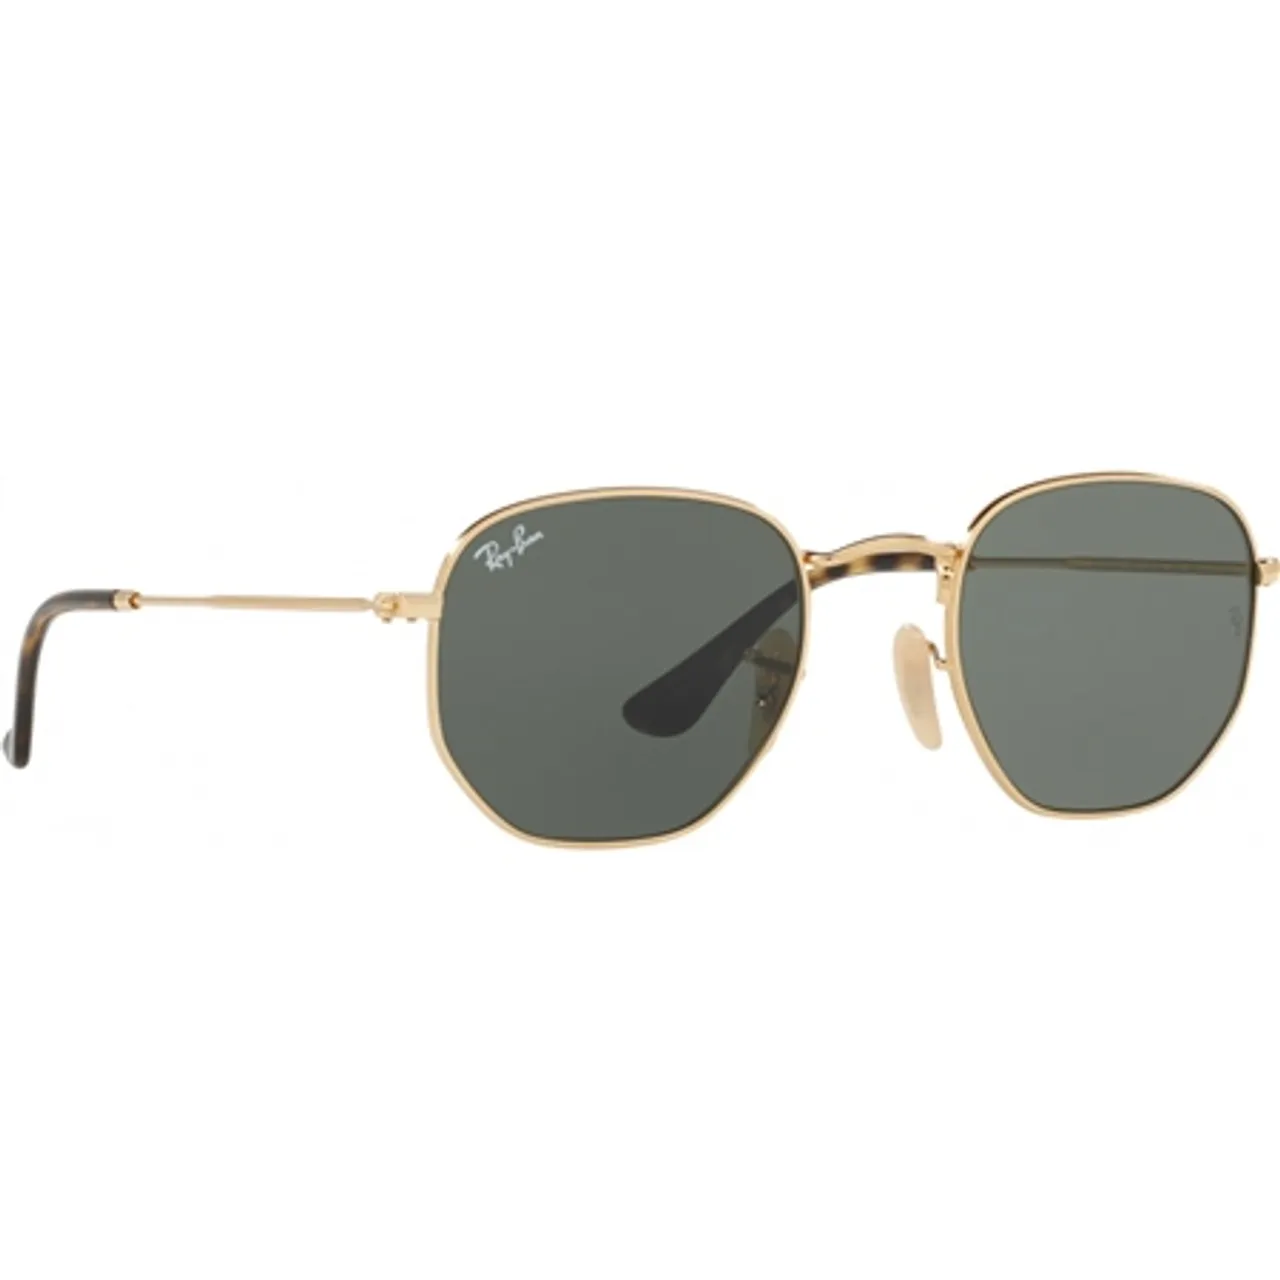 Ray-Ban Hexagonal @Collection Sunglasses  - Assorted